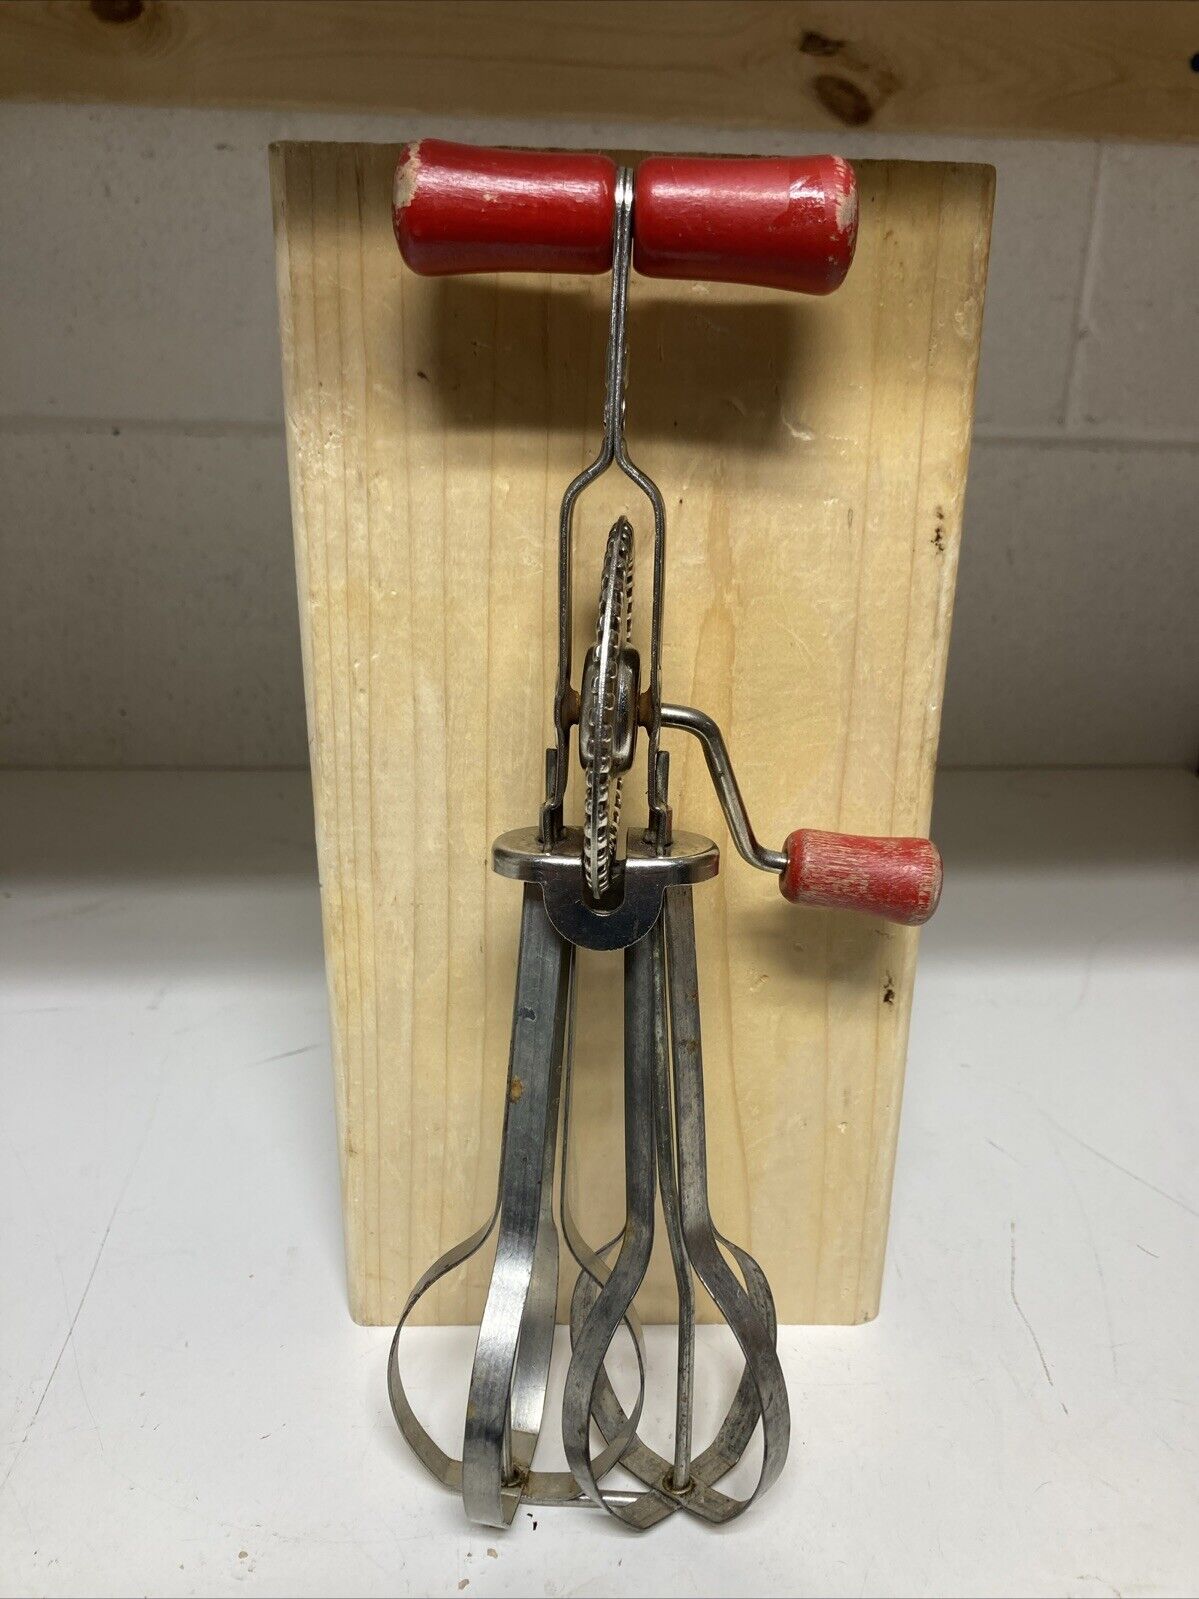 VTG Androck Hand Mixer Red Handles Stainless Steel Made in USA